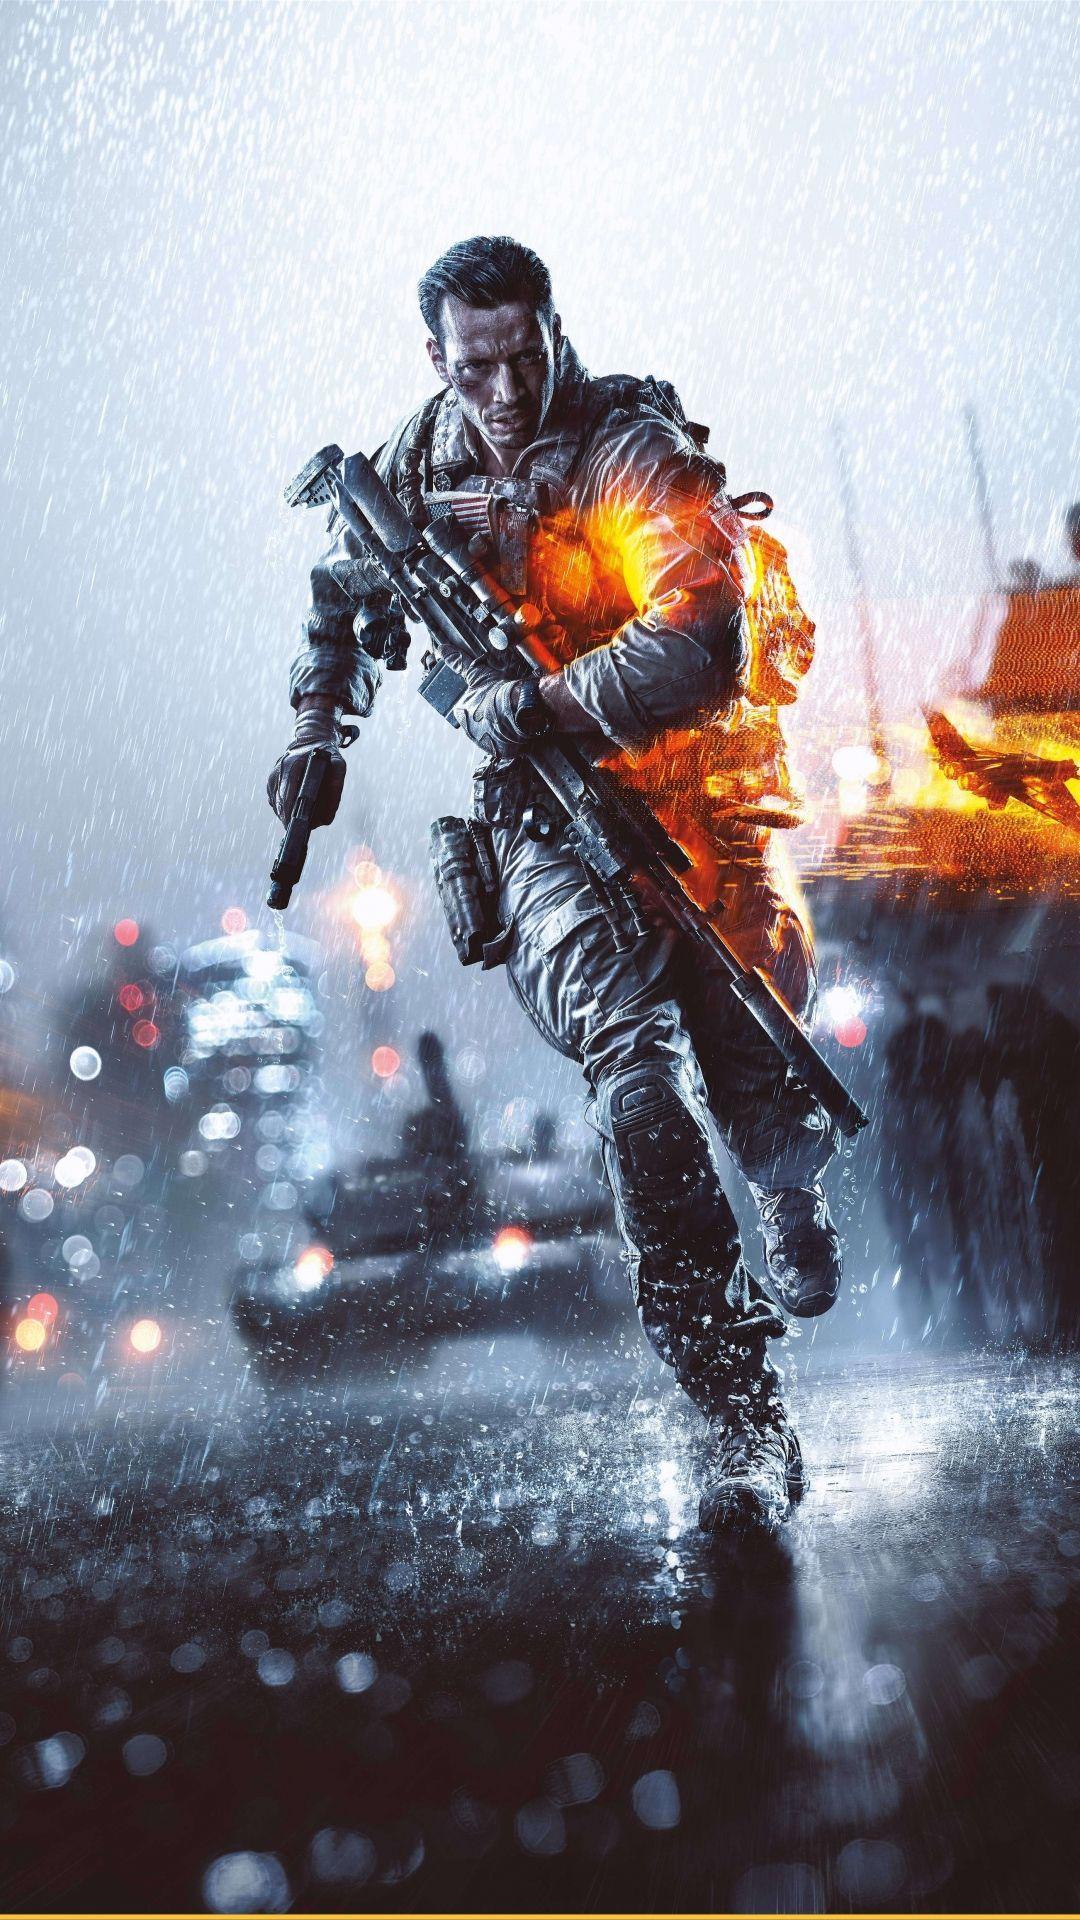 Battlefield V Iphone Wallpapers Top Free Battlefield V Iphone Backgrounds Wallpaperaccess